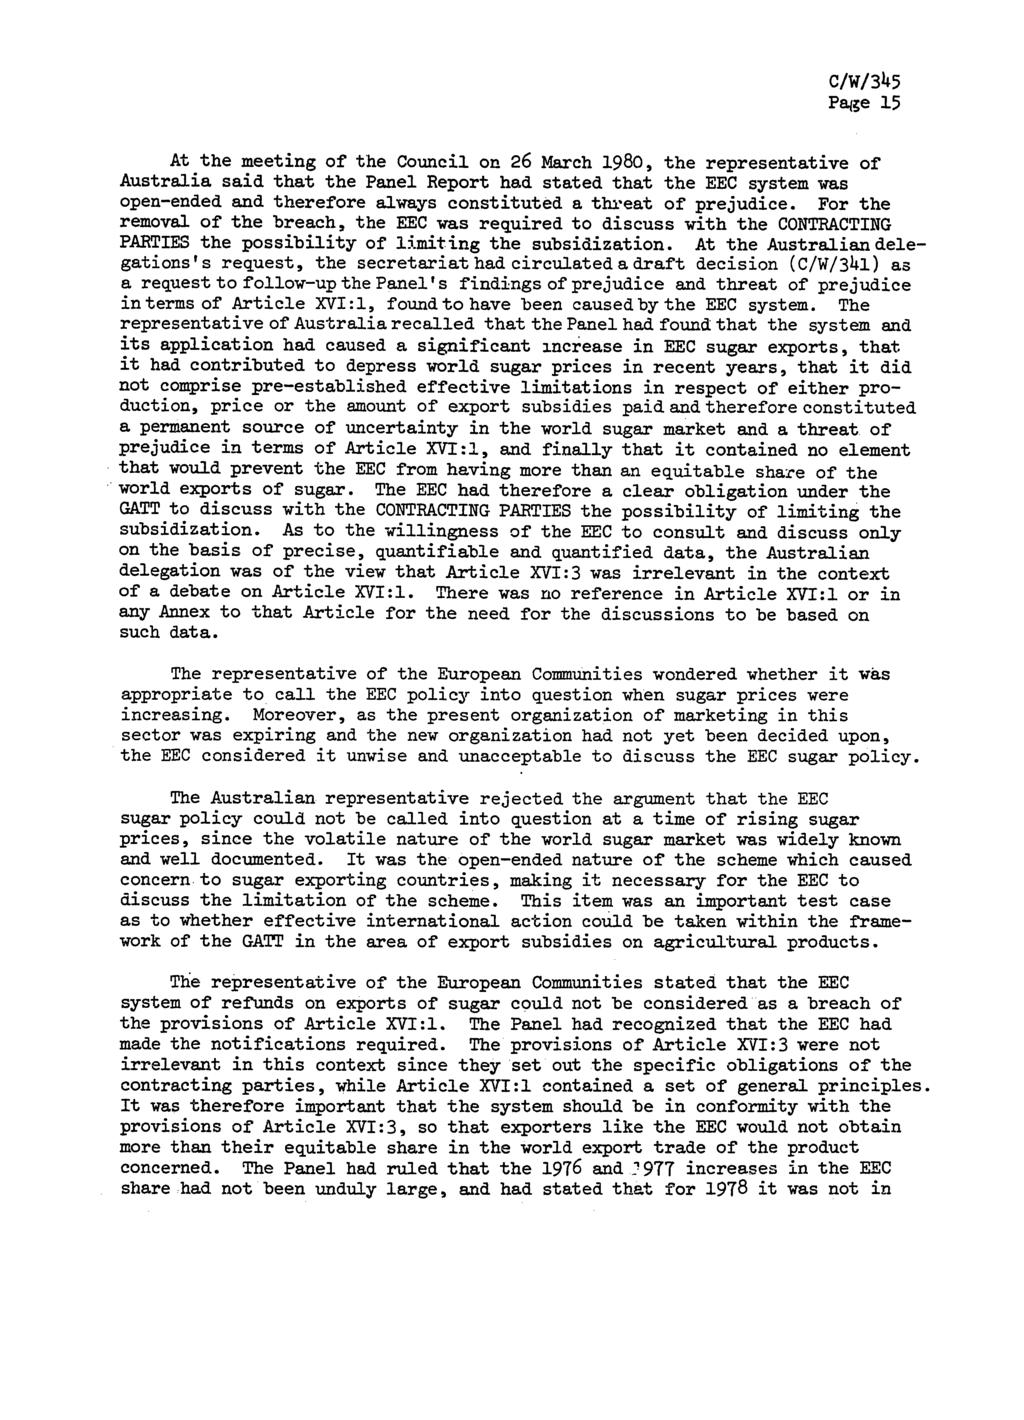 Page 15 At the meeting of the Council on 26 March 1980, the representative of Australia said that the Panel Report had stated that the EEC system was open-ended and therefore always constituted a